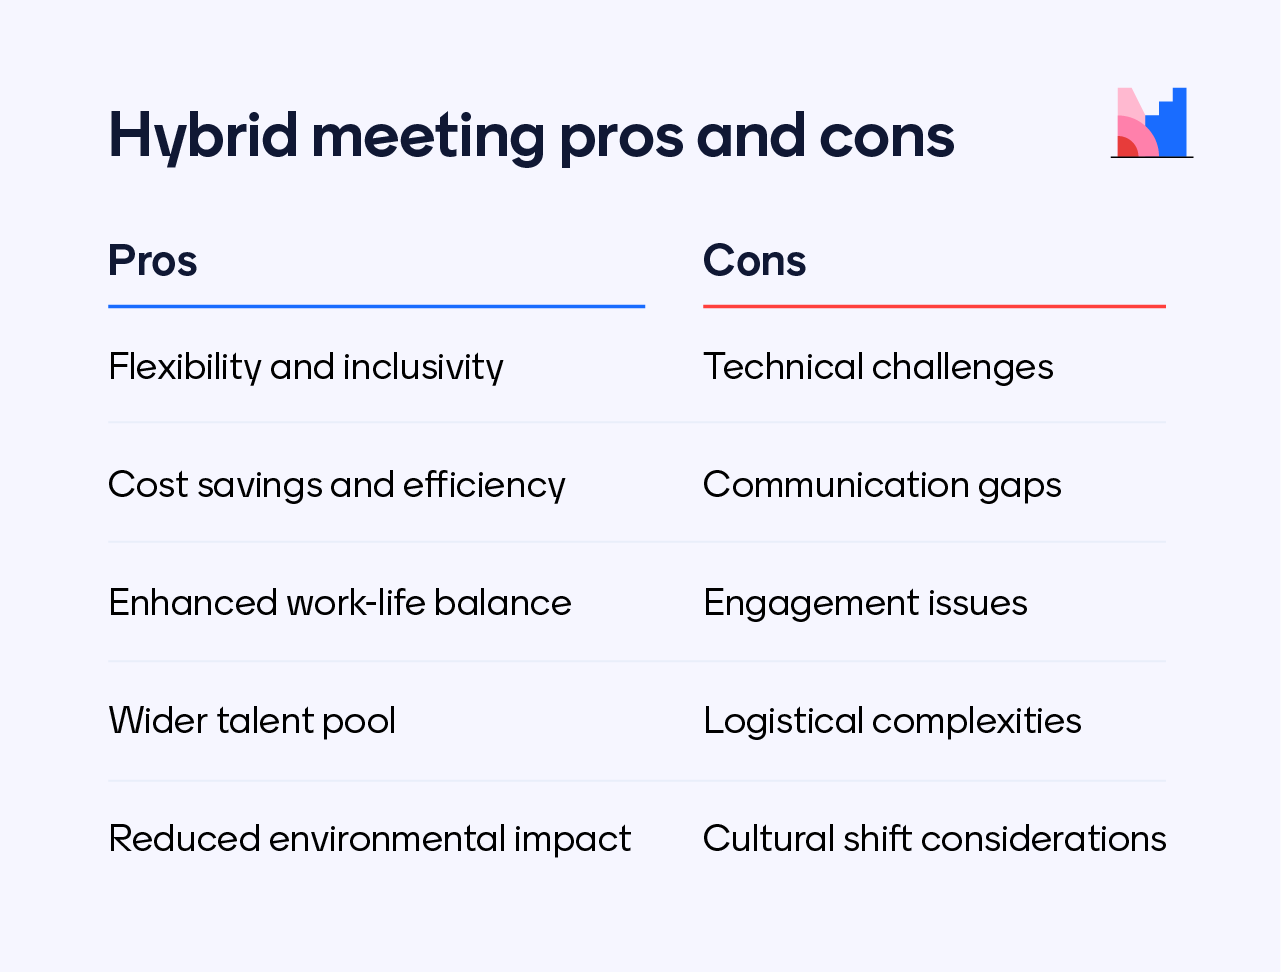 Table listing pros and cons of hybird meetings